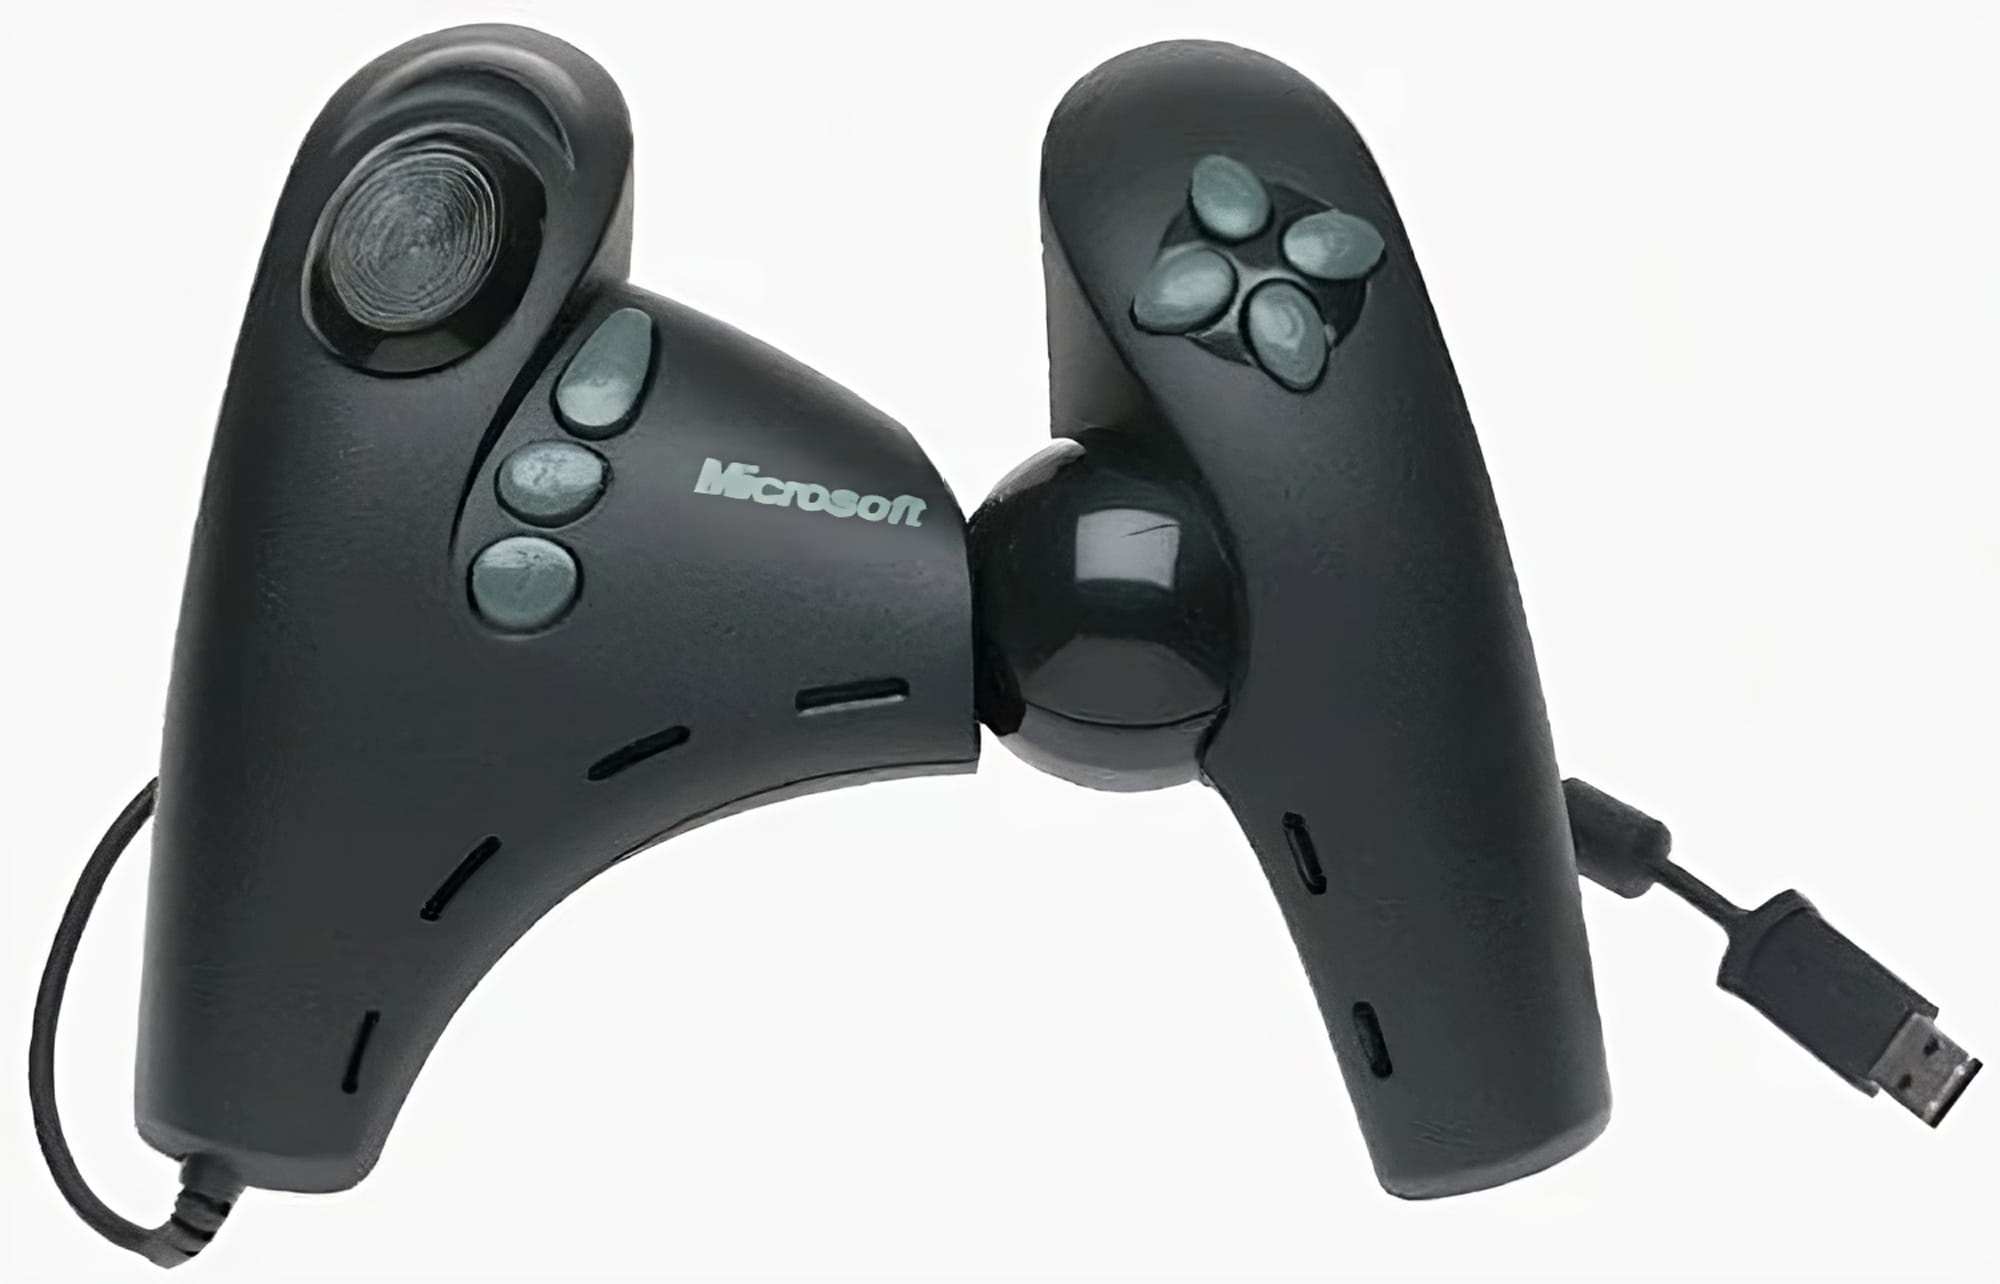  24 years ago, Microsoft released the silliest PC controller ever 